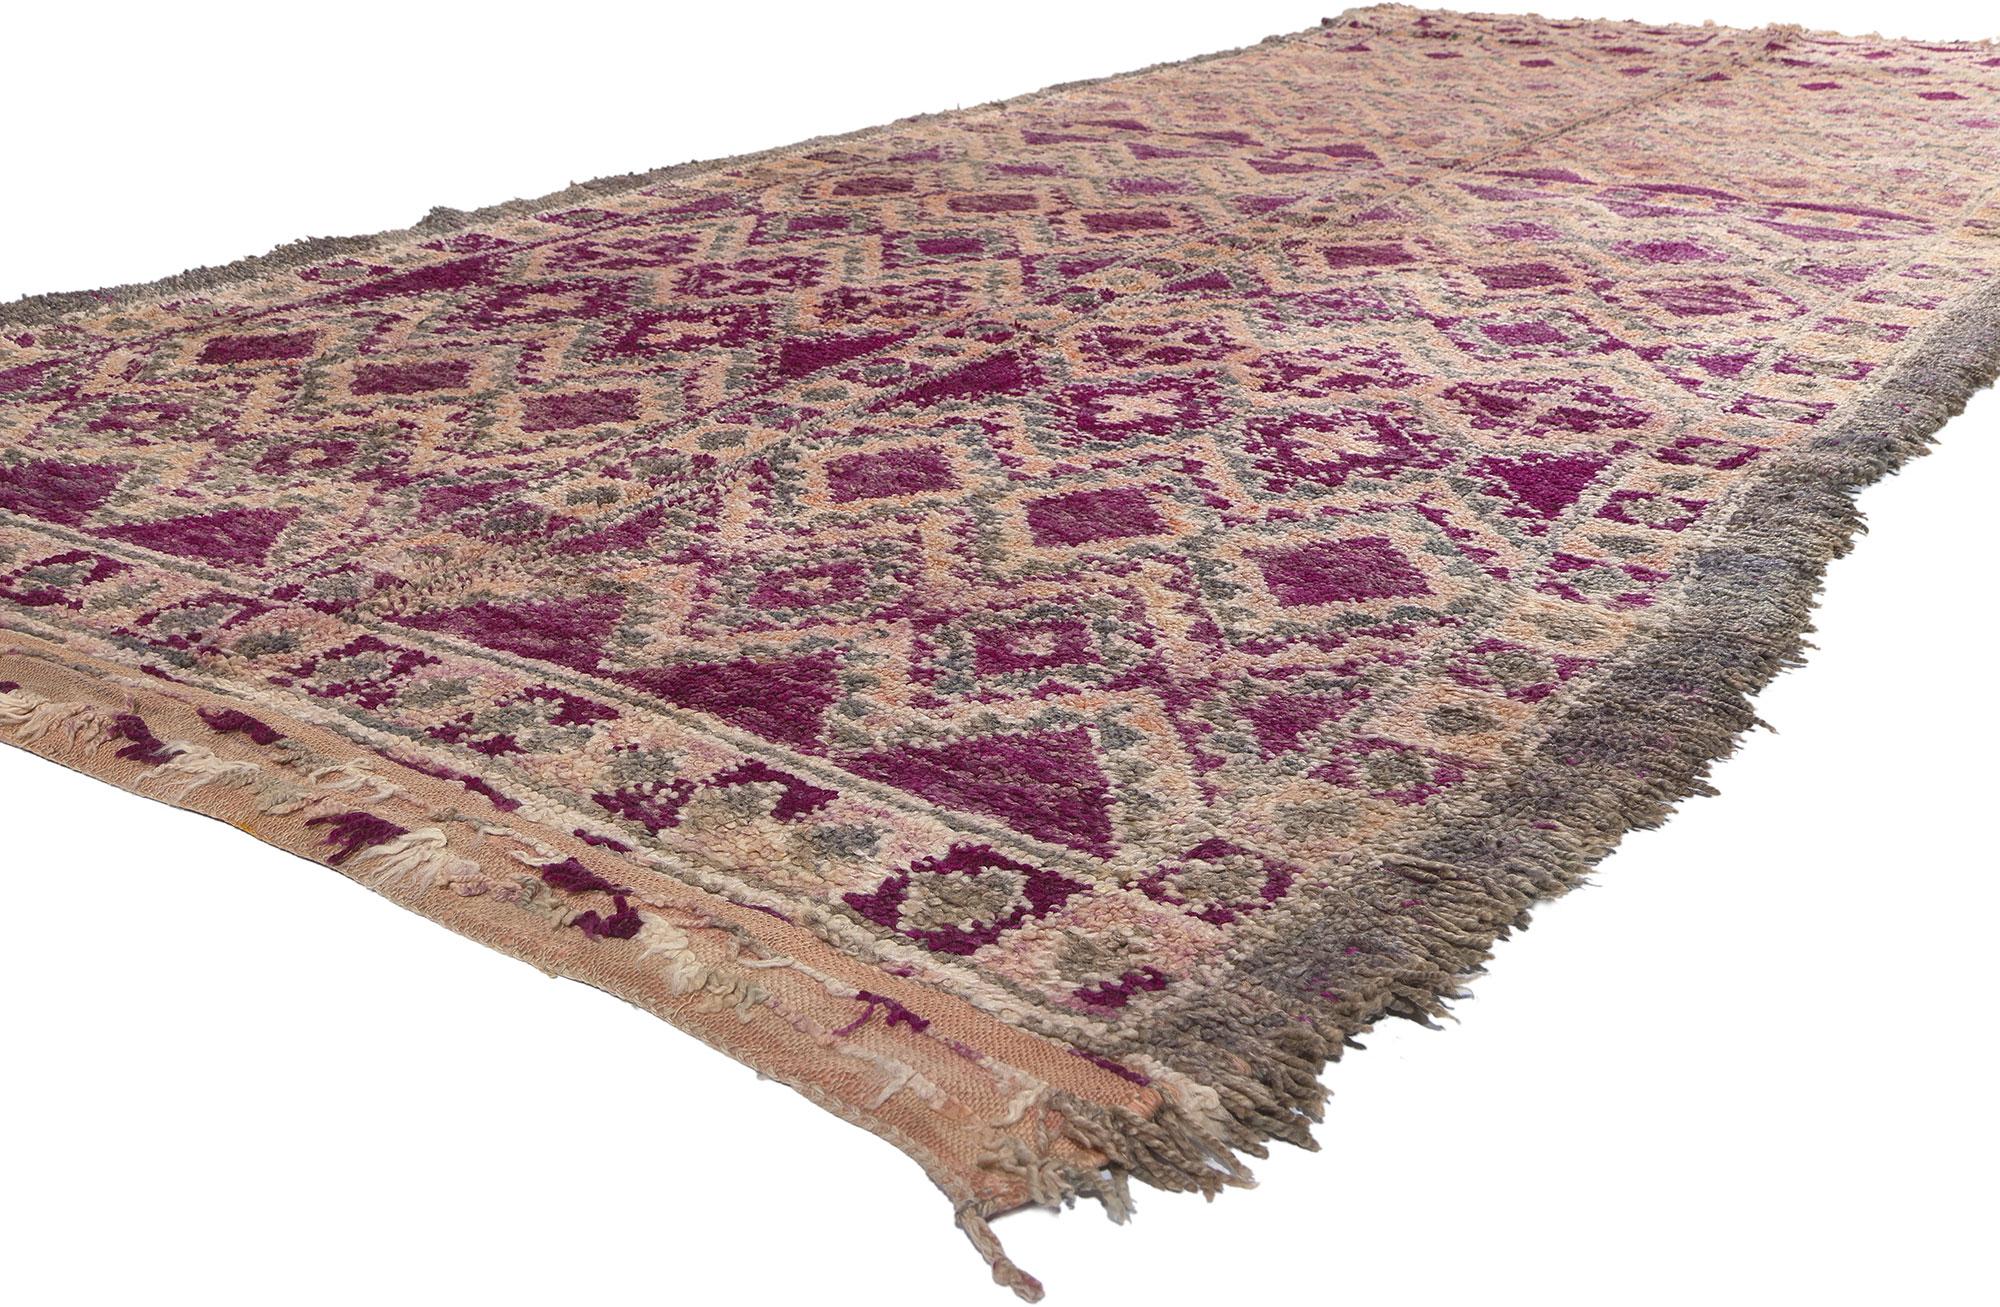 20855 Vintage Purple Beni MGuild Moroccan Rug, 05'08 x 14'03. In the heart of this Beni MGuild rug lies the essence of Moroccan artistry. Beni MGuild rugs, hailing from the tribal territories of the Middle Atlas Mountains, are renowned for their